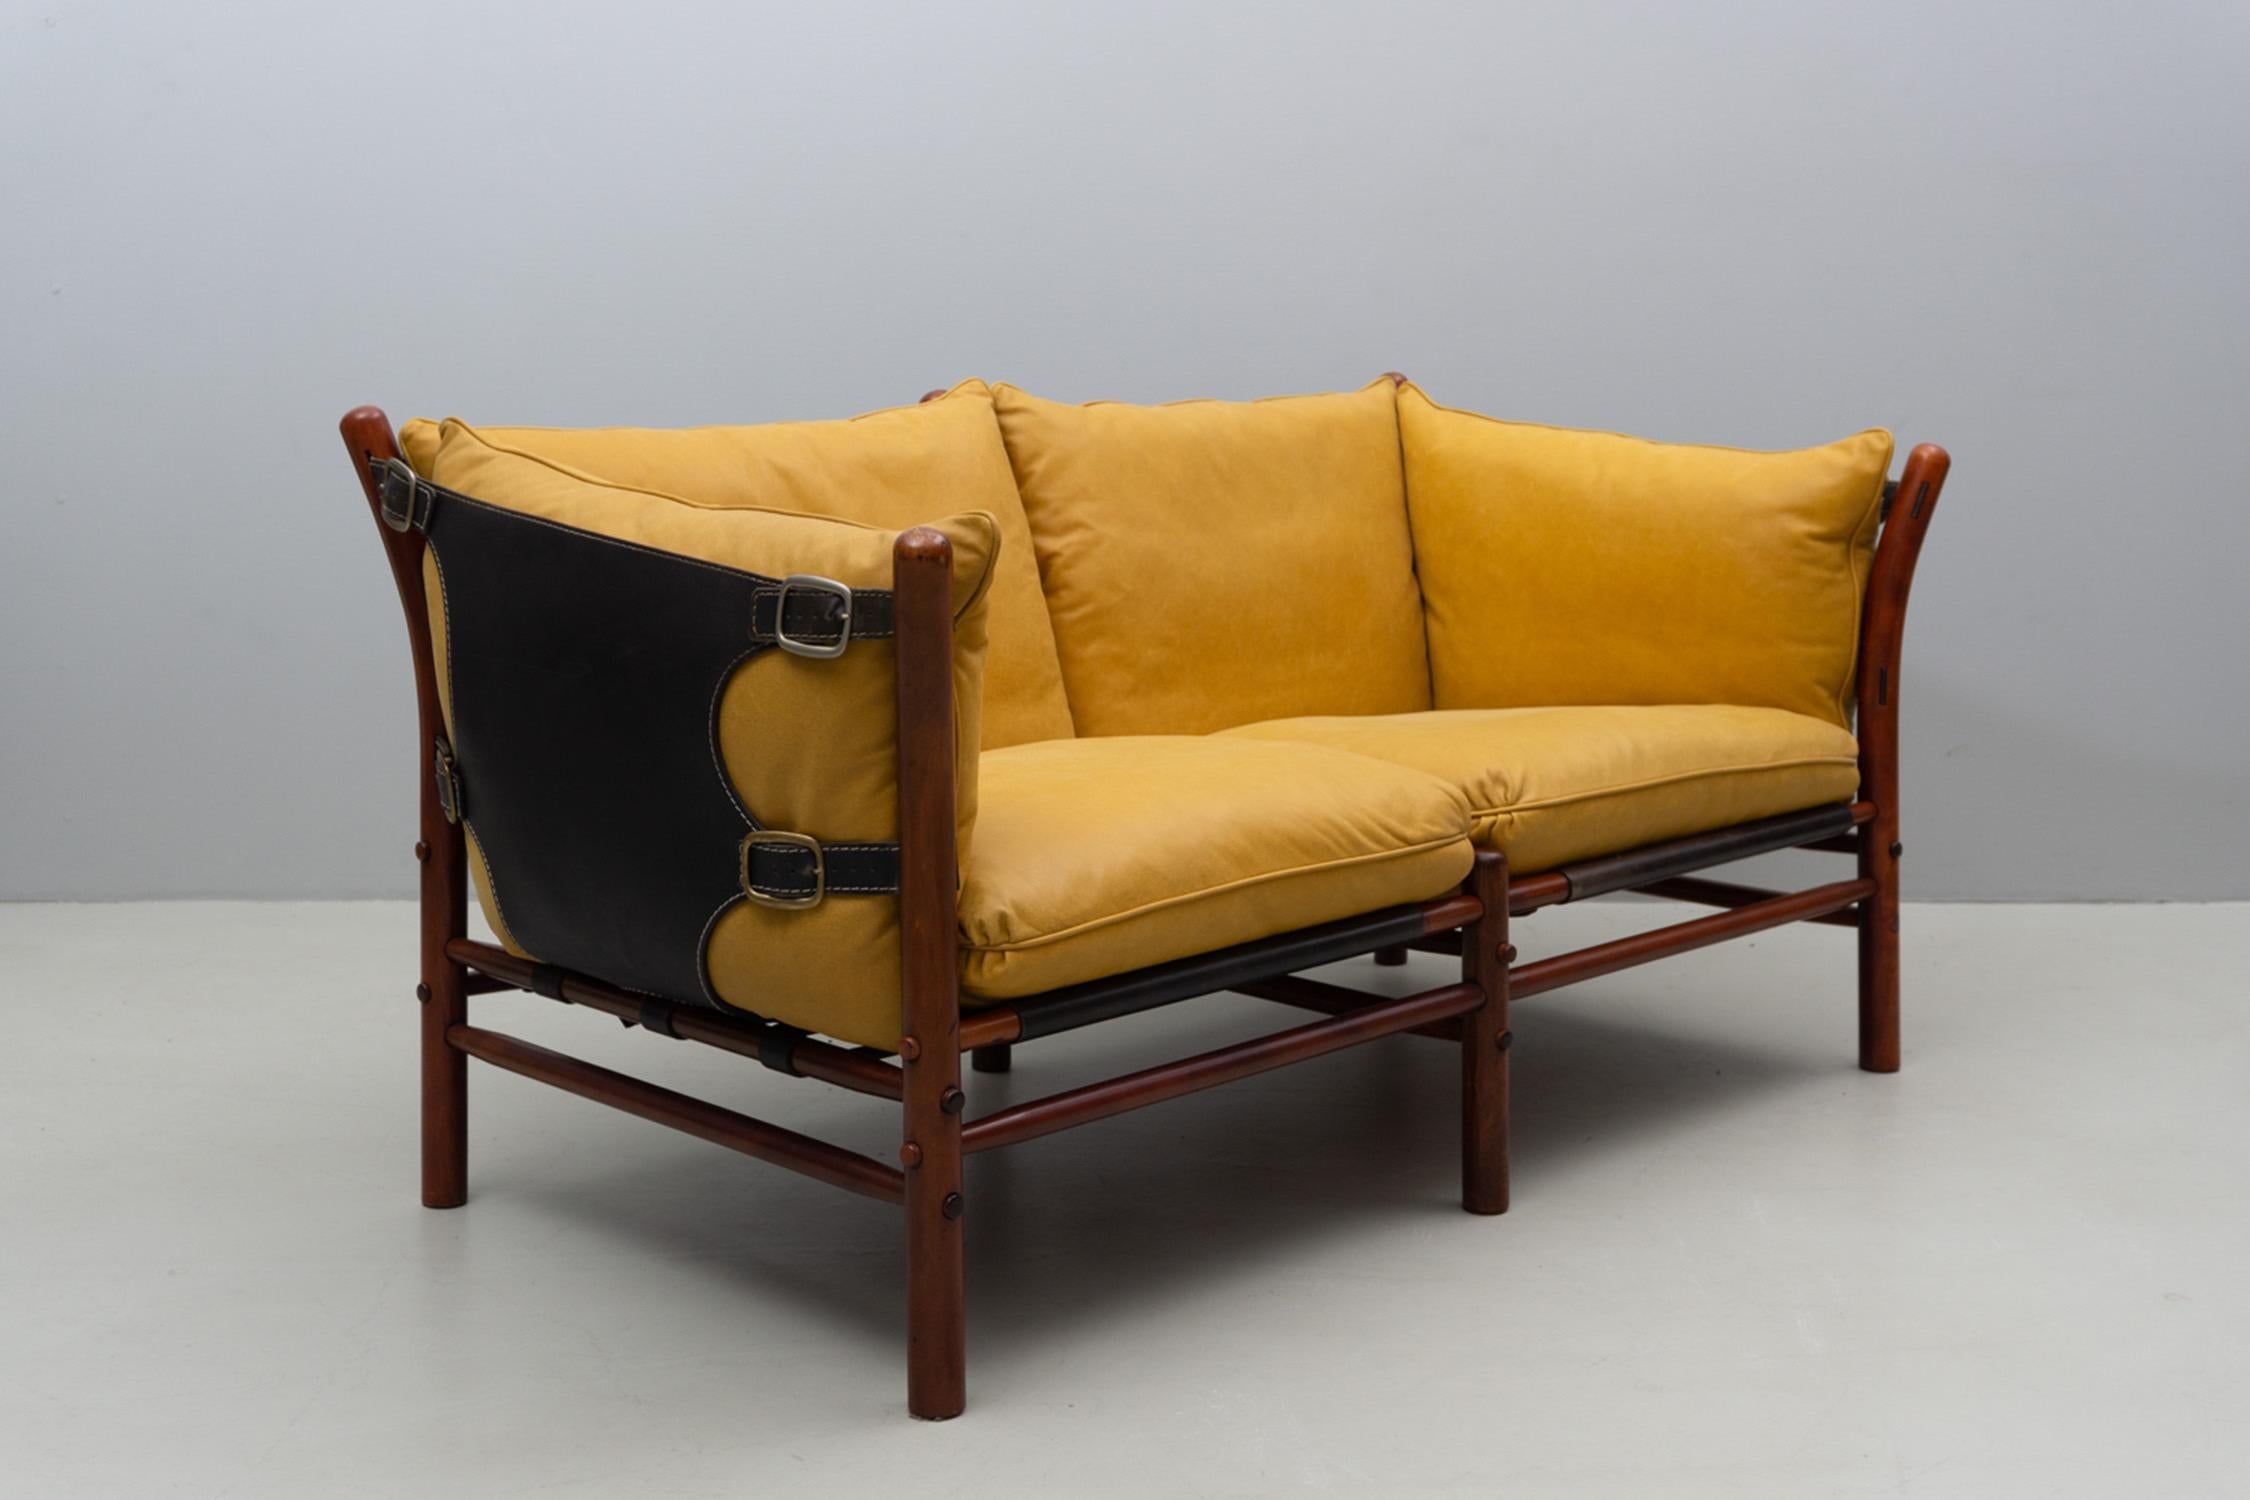 Sofa 'Illona' for two in mustard colored buffalo leather with a structure made of birch wood. Renewed cover and downs. 

Arne Norell (1917–1971) was a Swedish furniture designer and entrepreneur. He started his own workshop in 1954 in the town of